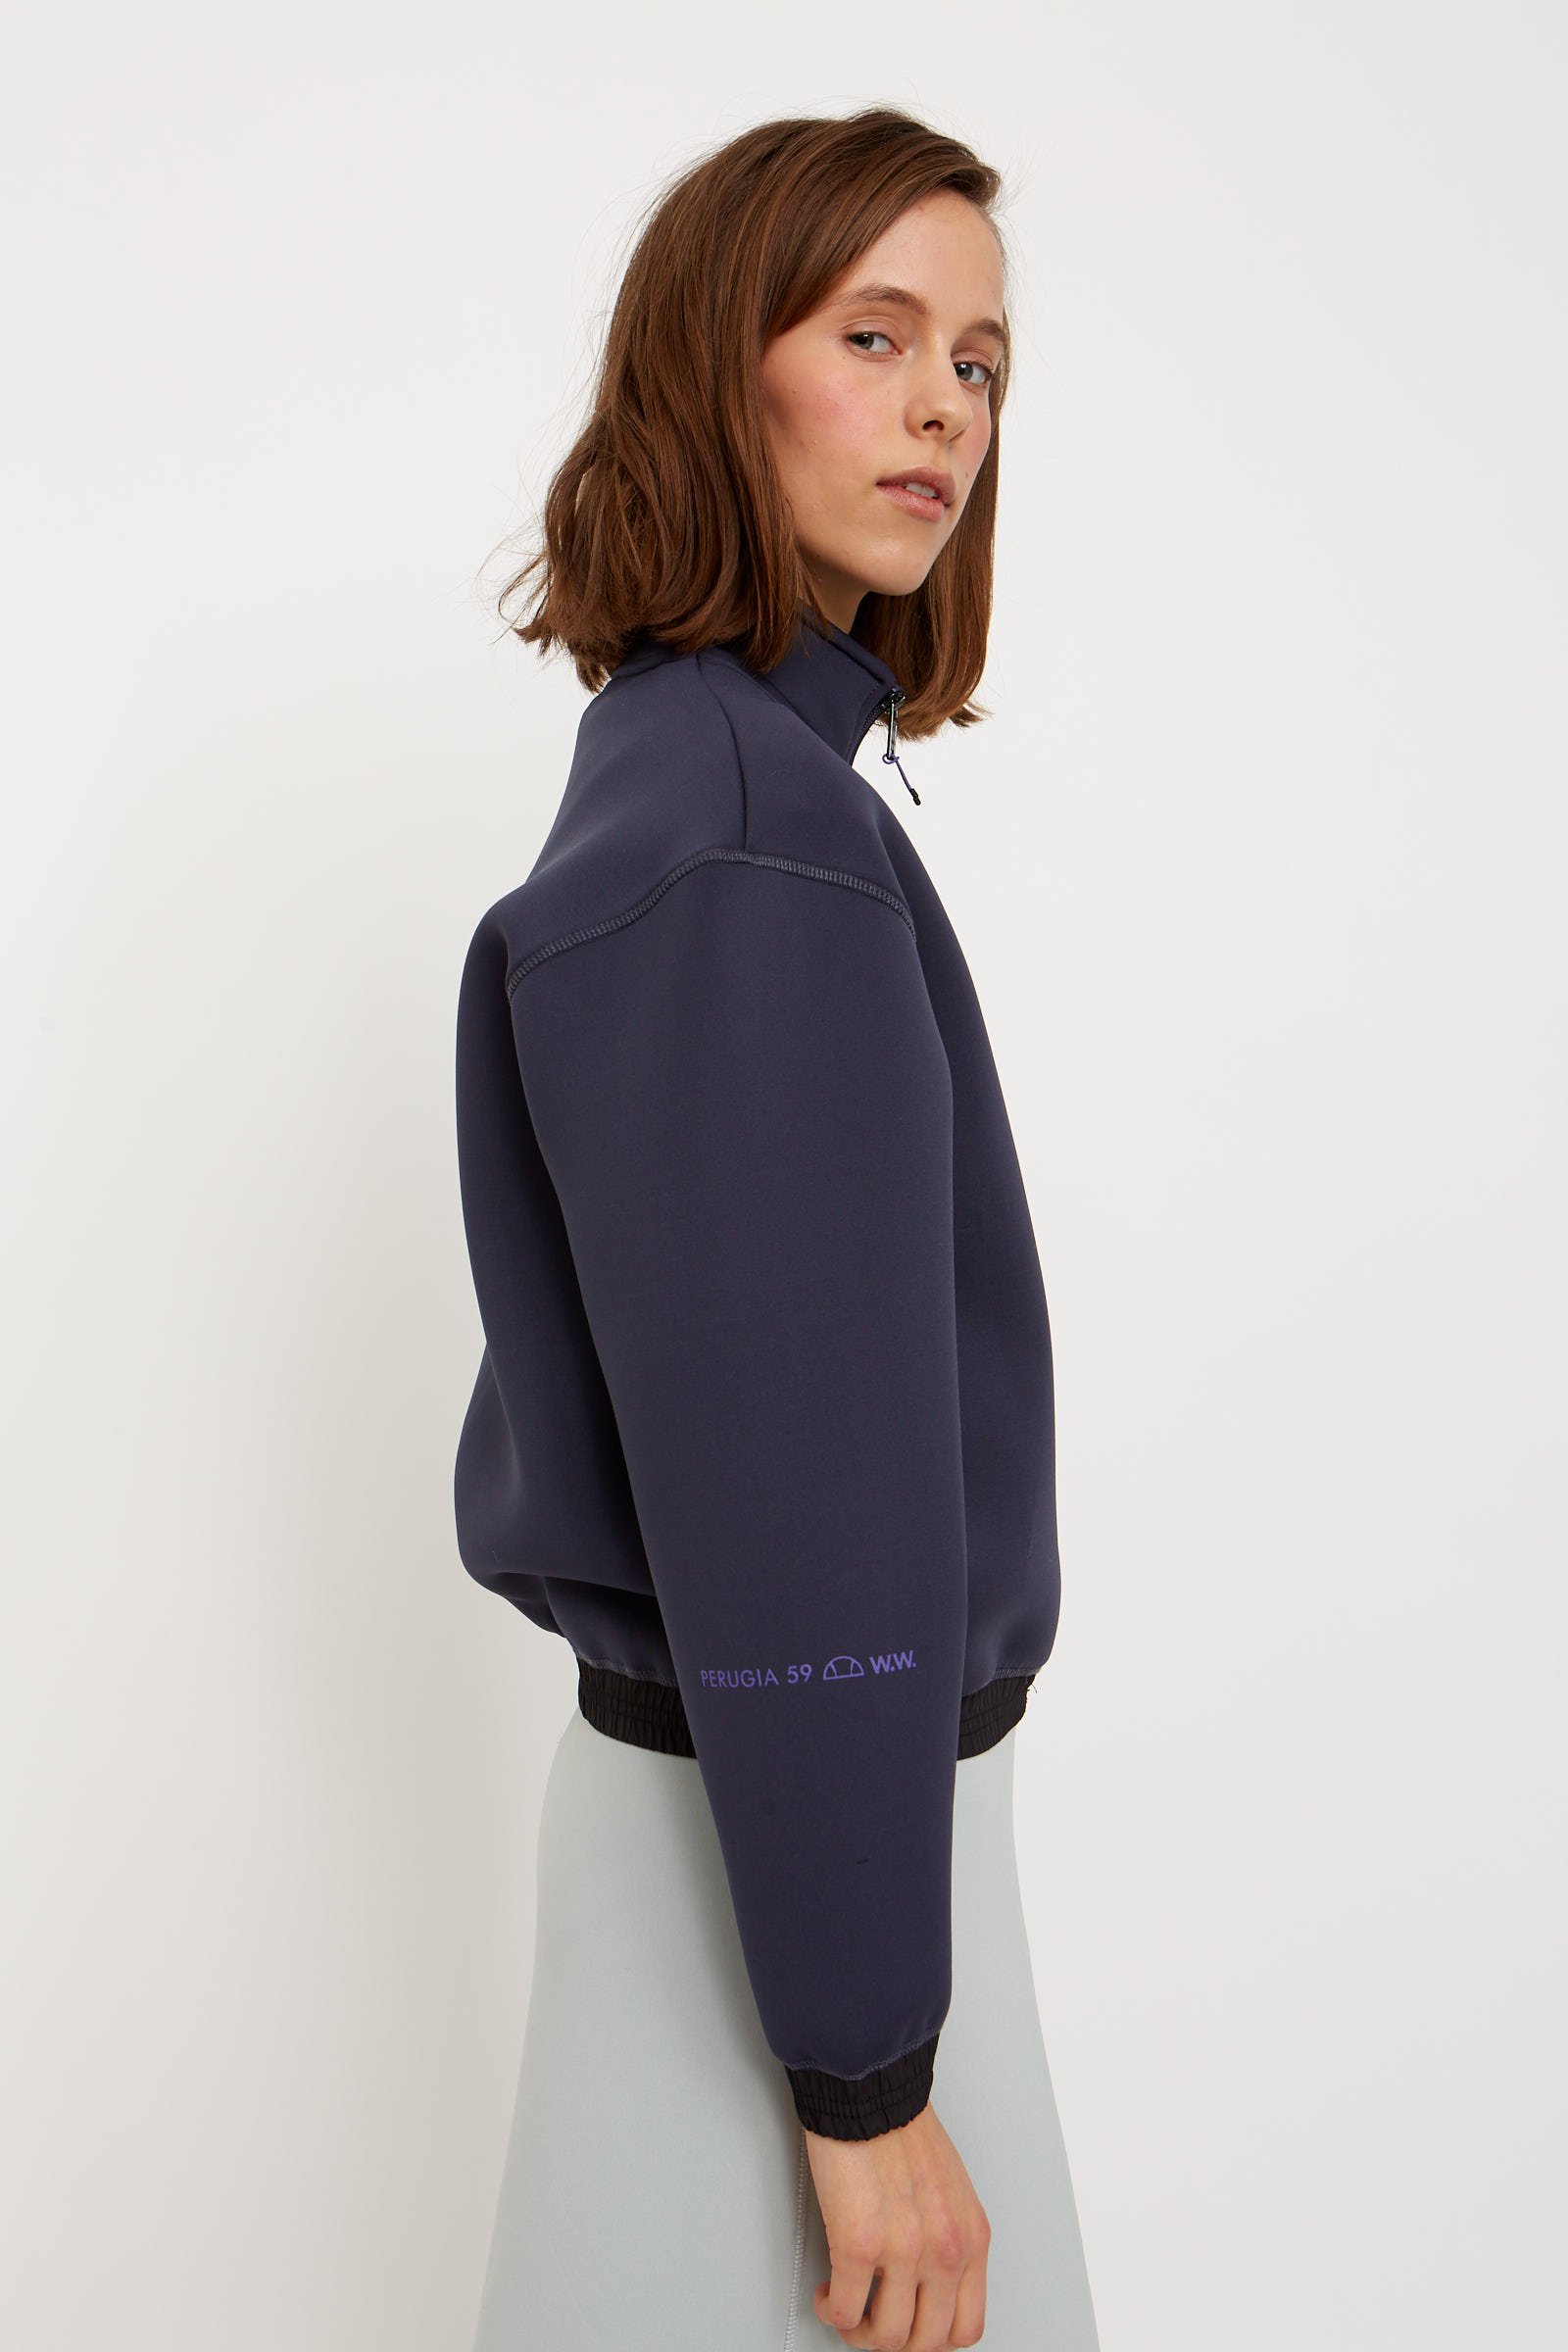 ellesse jacke about you